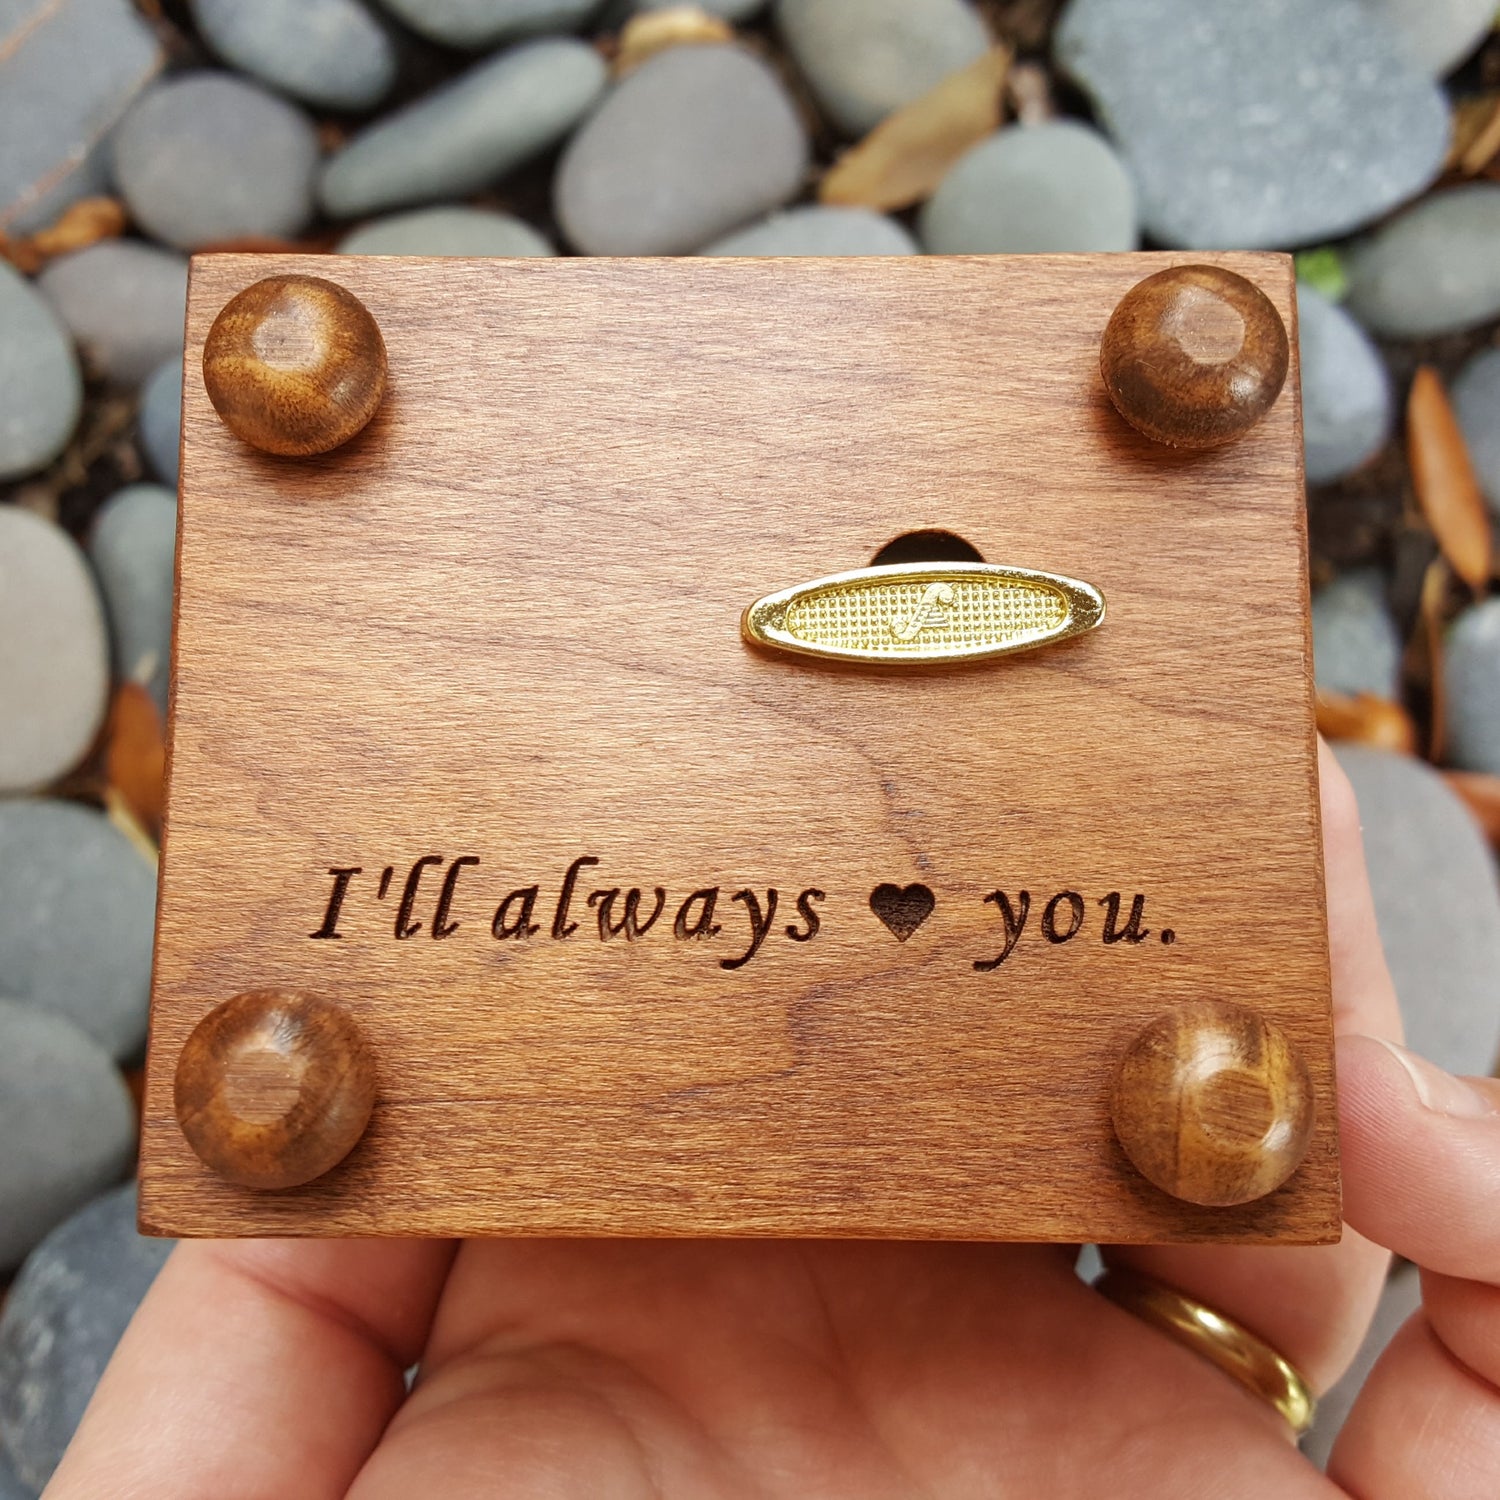 I will always love you music box personalizing 